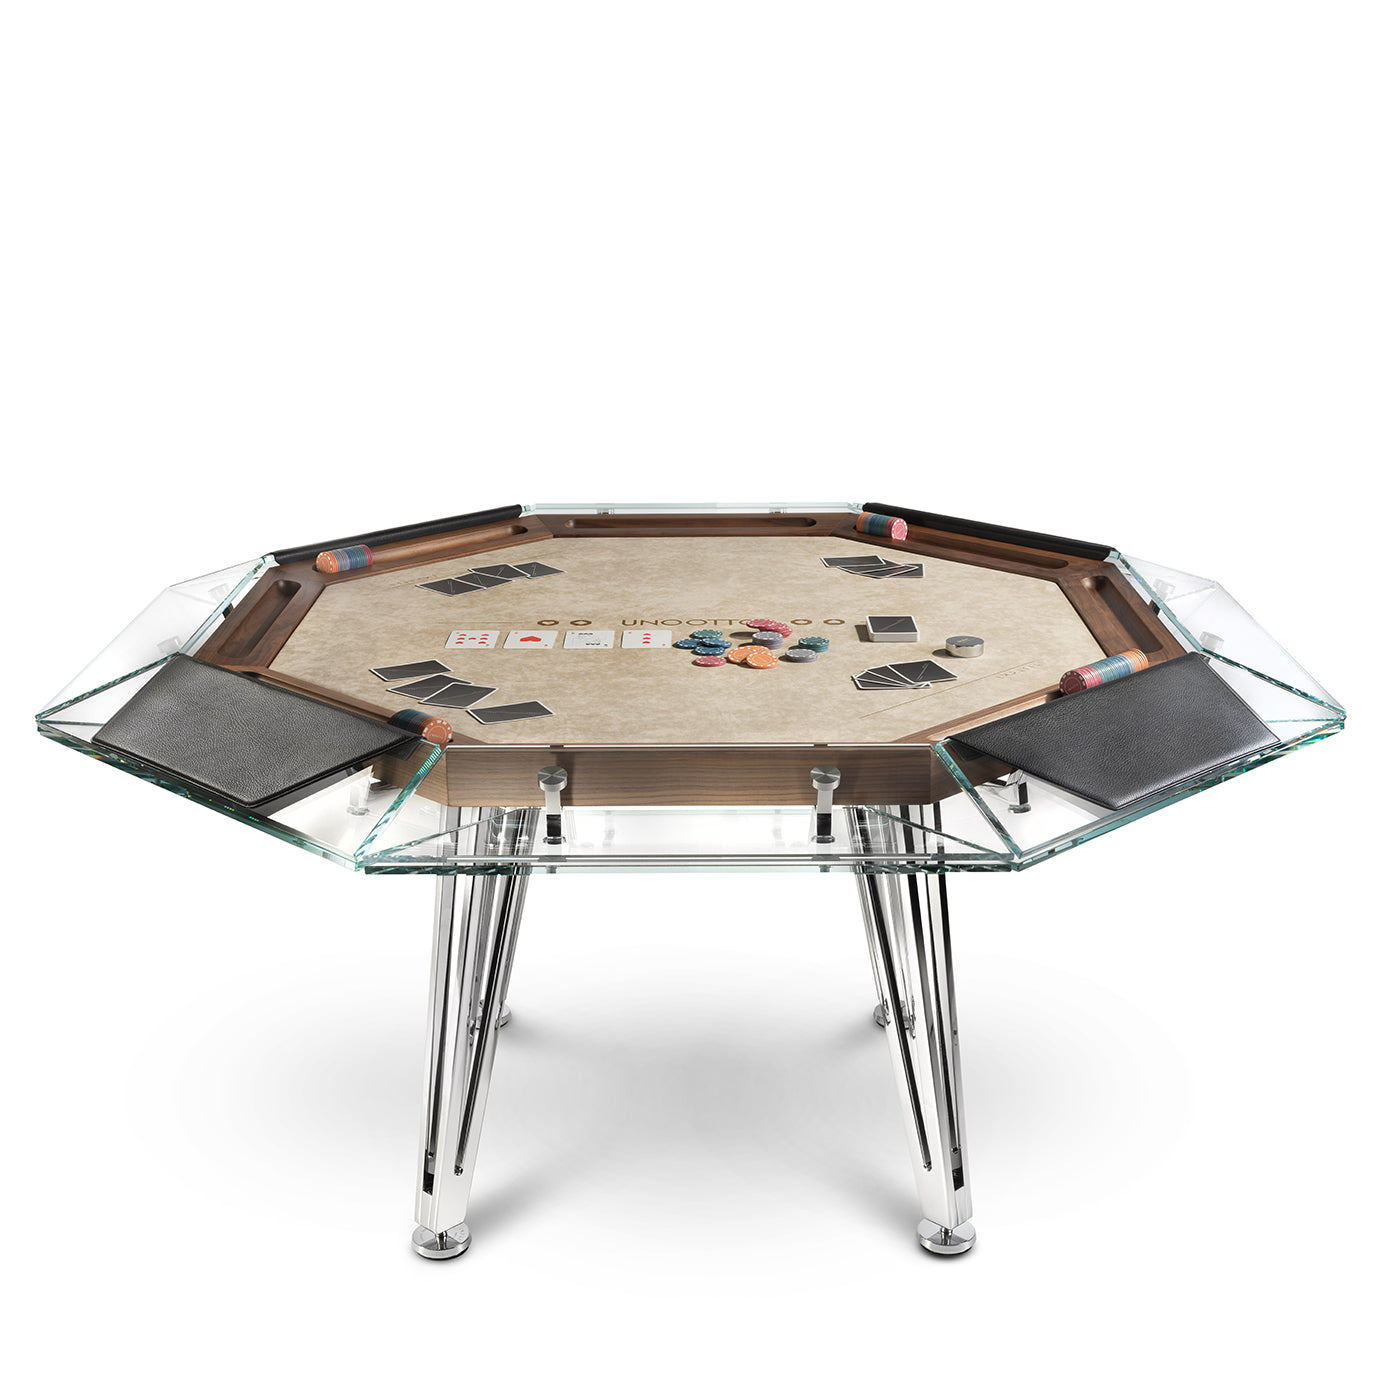 Unootto 8 Player Wood Edition Poker Table - Alternative view 3